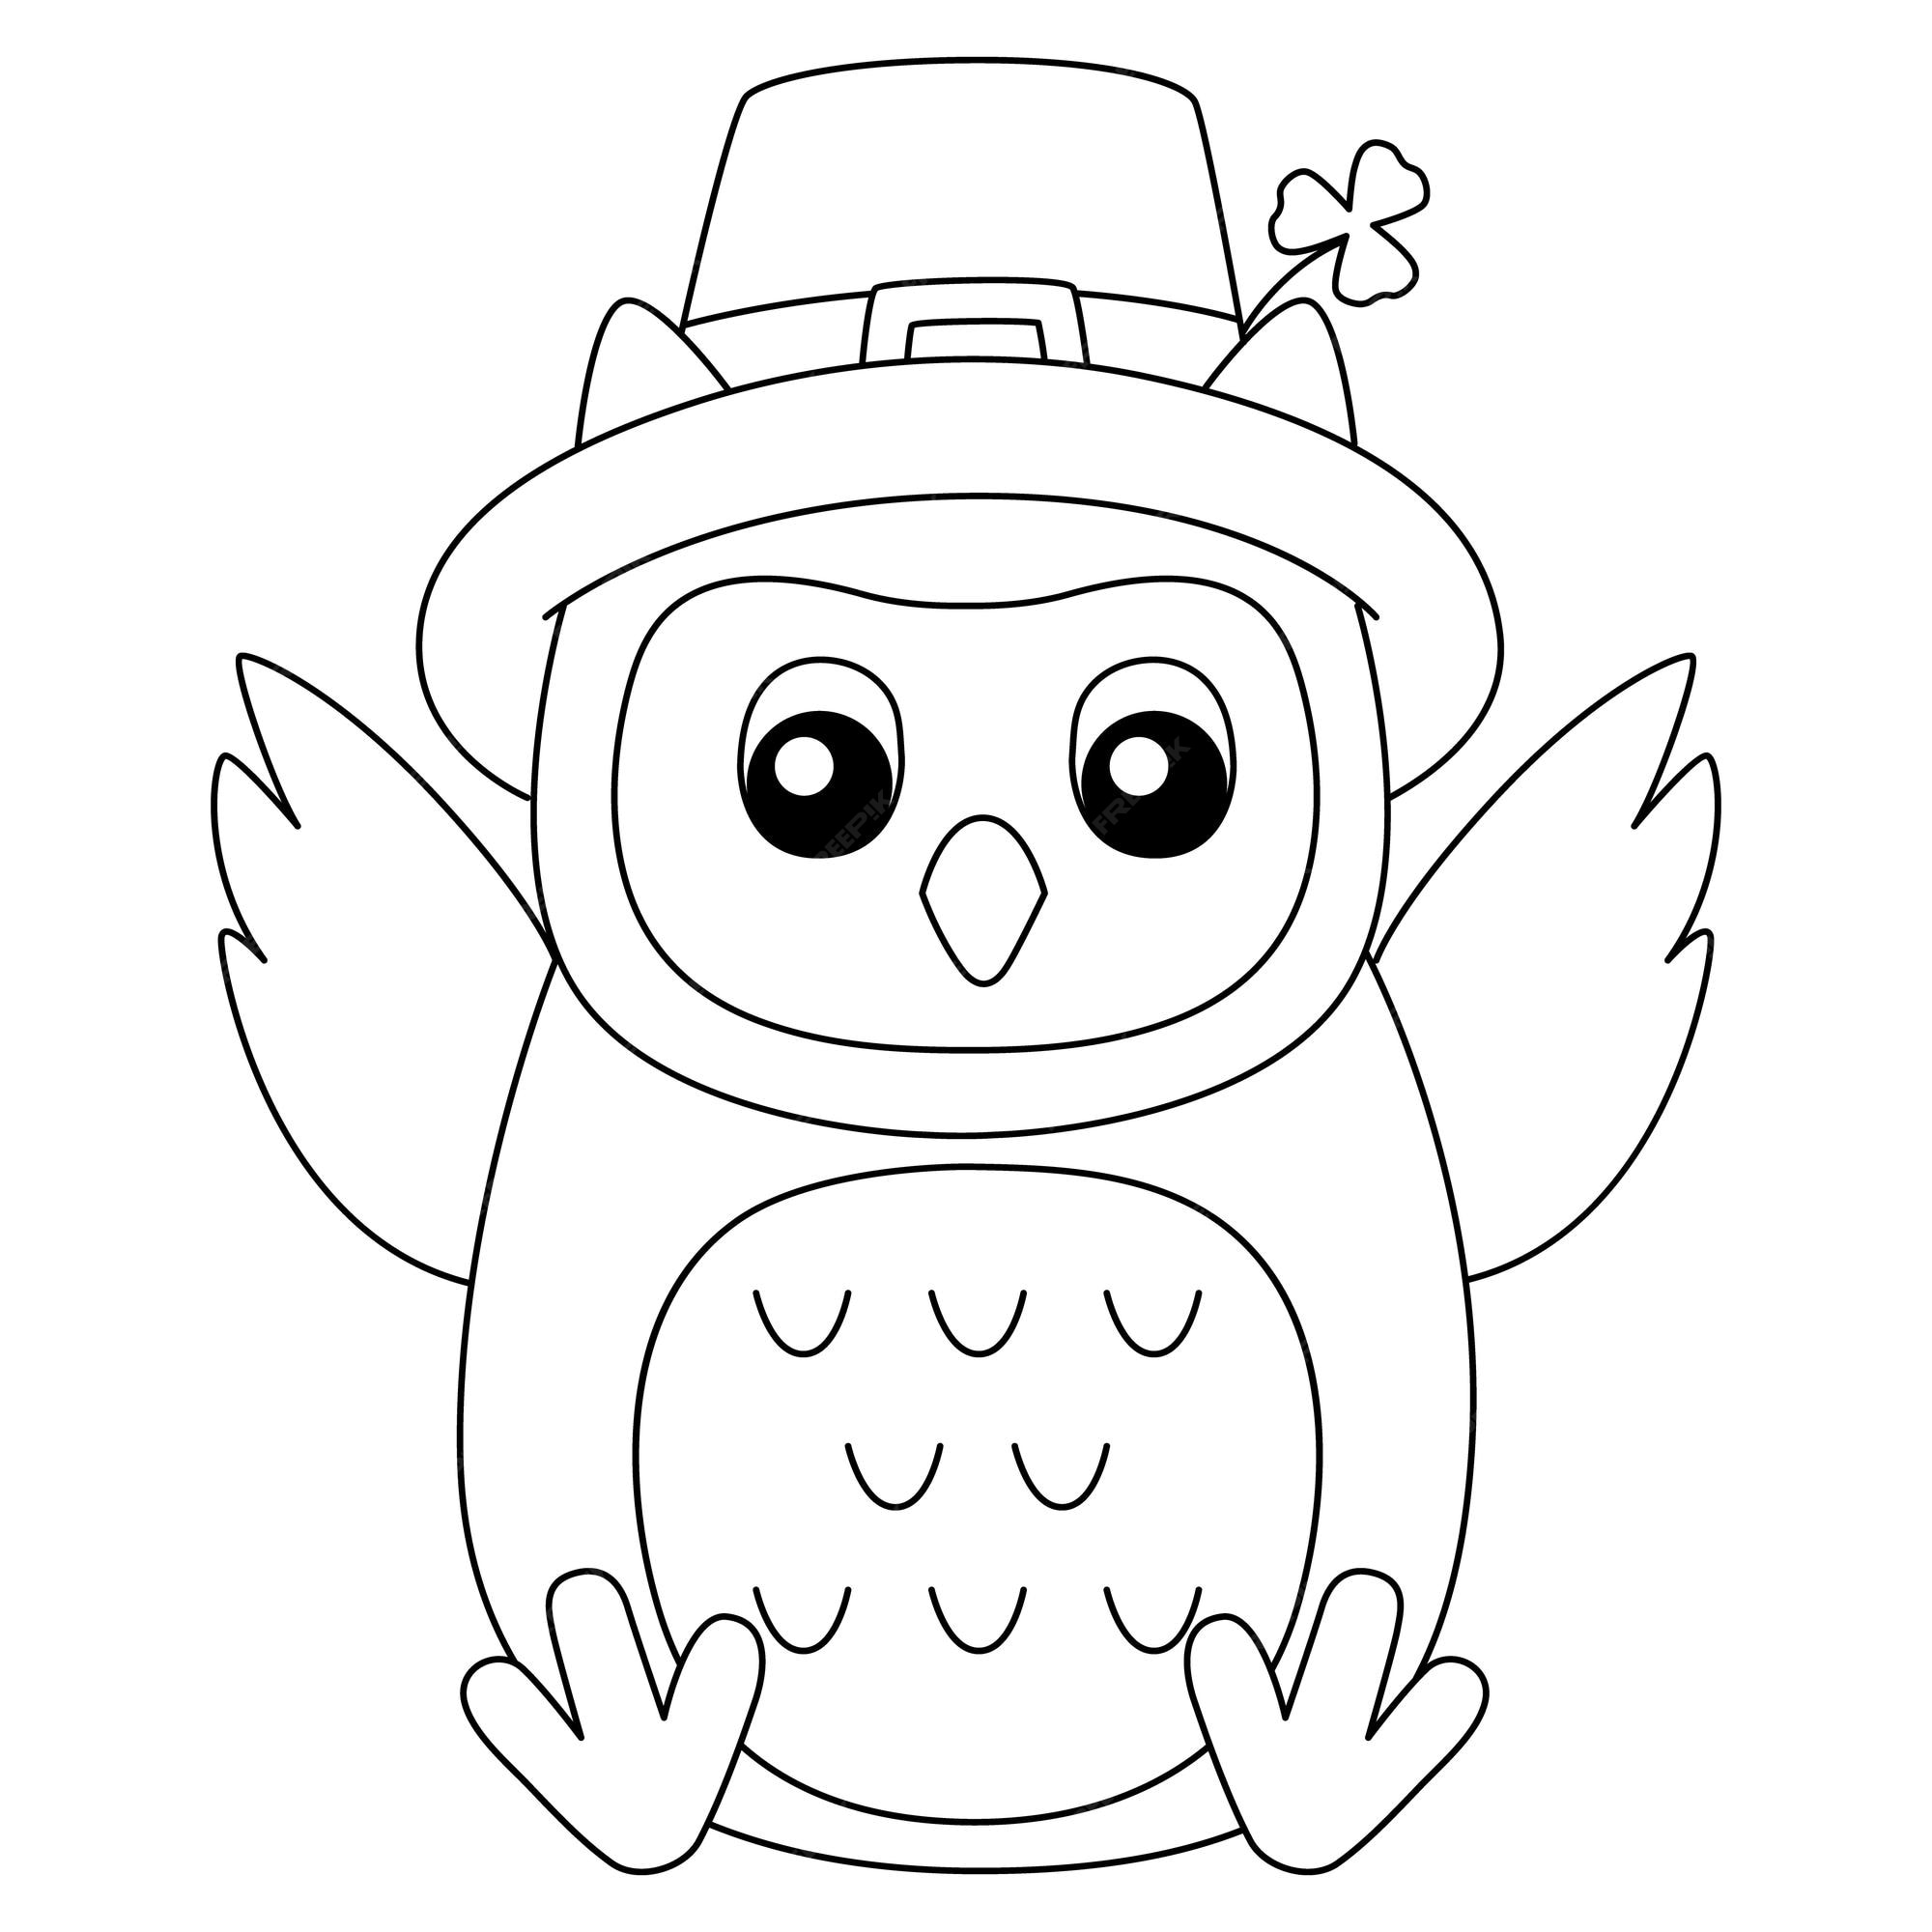 Premium vector a cute and funny coloring page of a st patricks day owl provides hours of coloring fun for children to color this page is very easy suitable for little